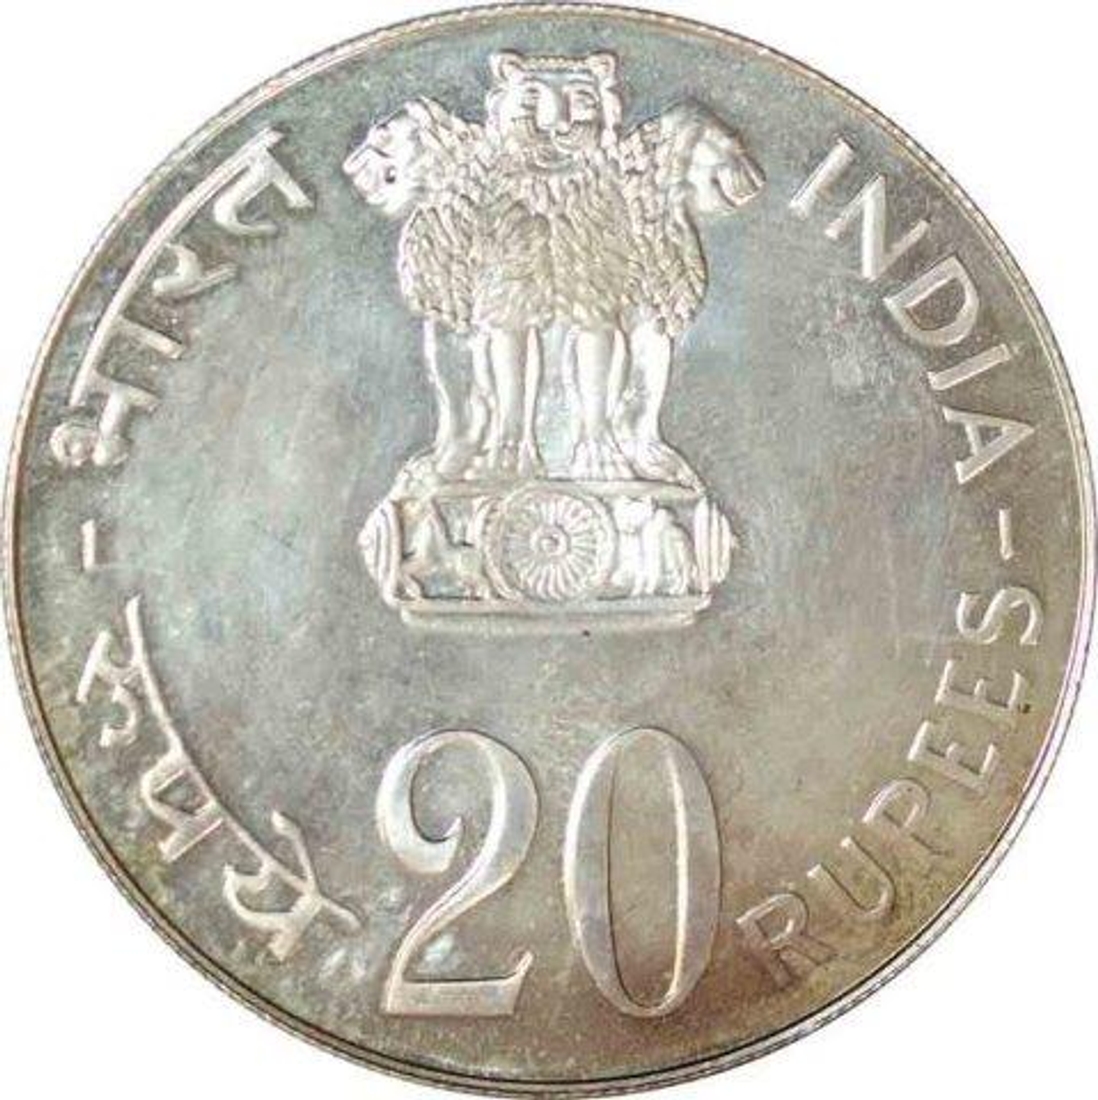 Twenty Rupees of Grow More Food of Bombay Mint of the year 1973.